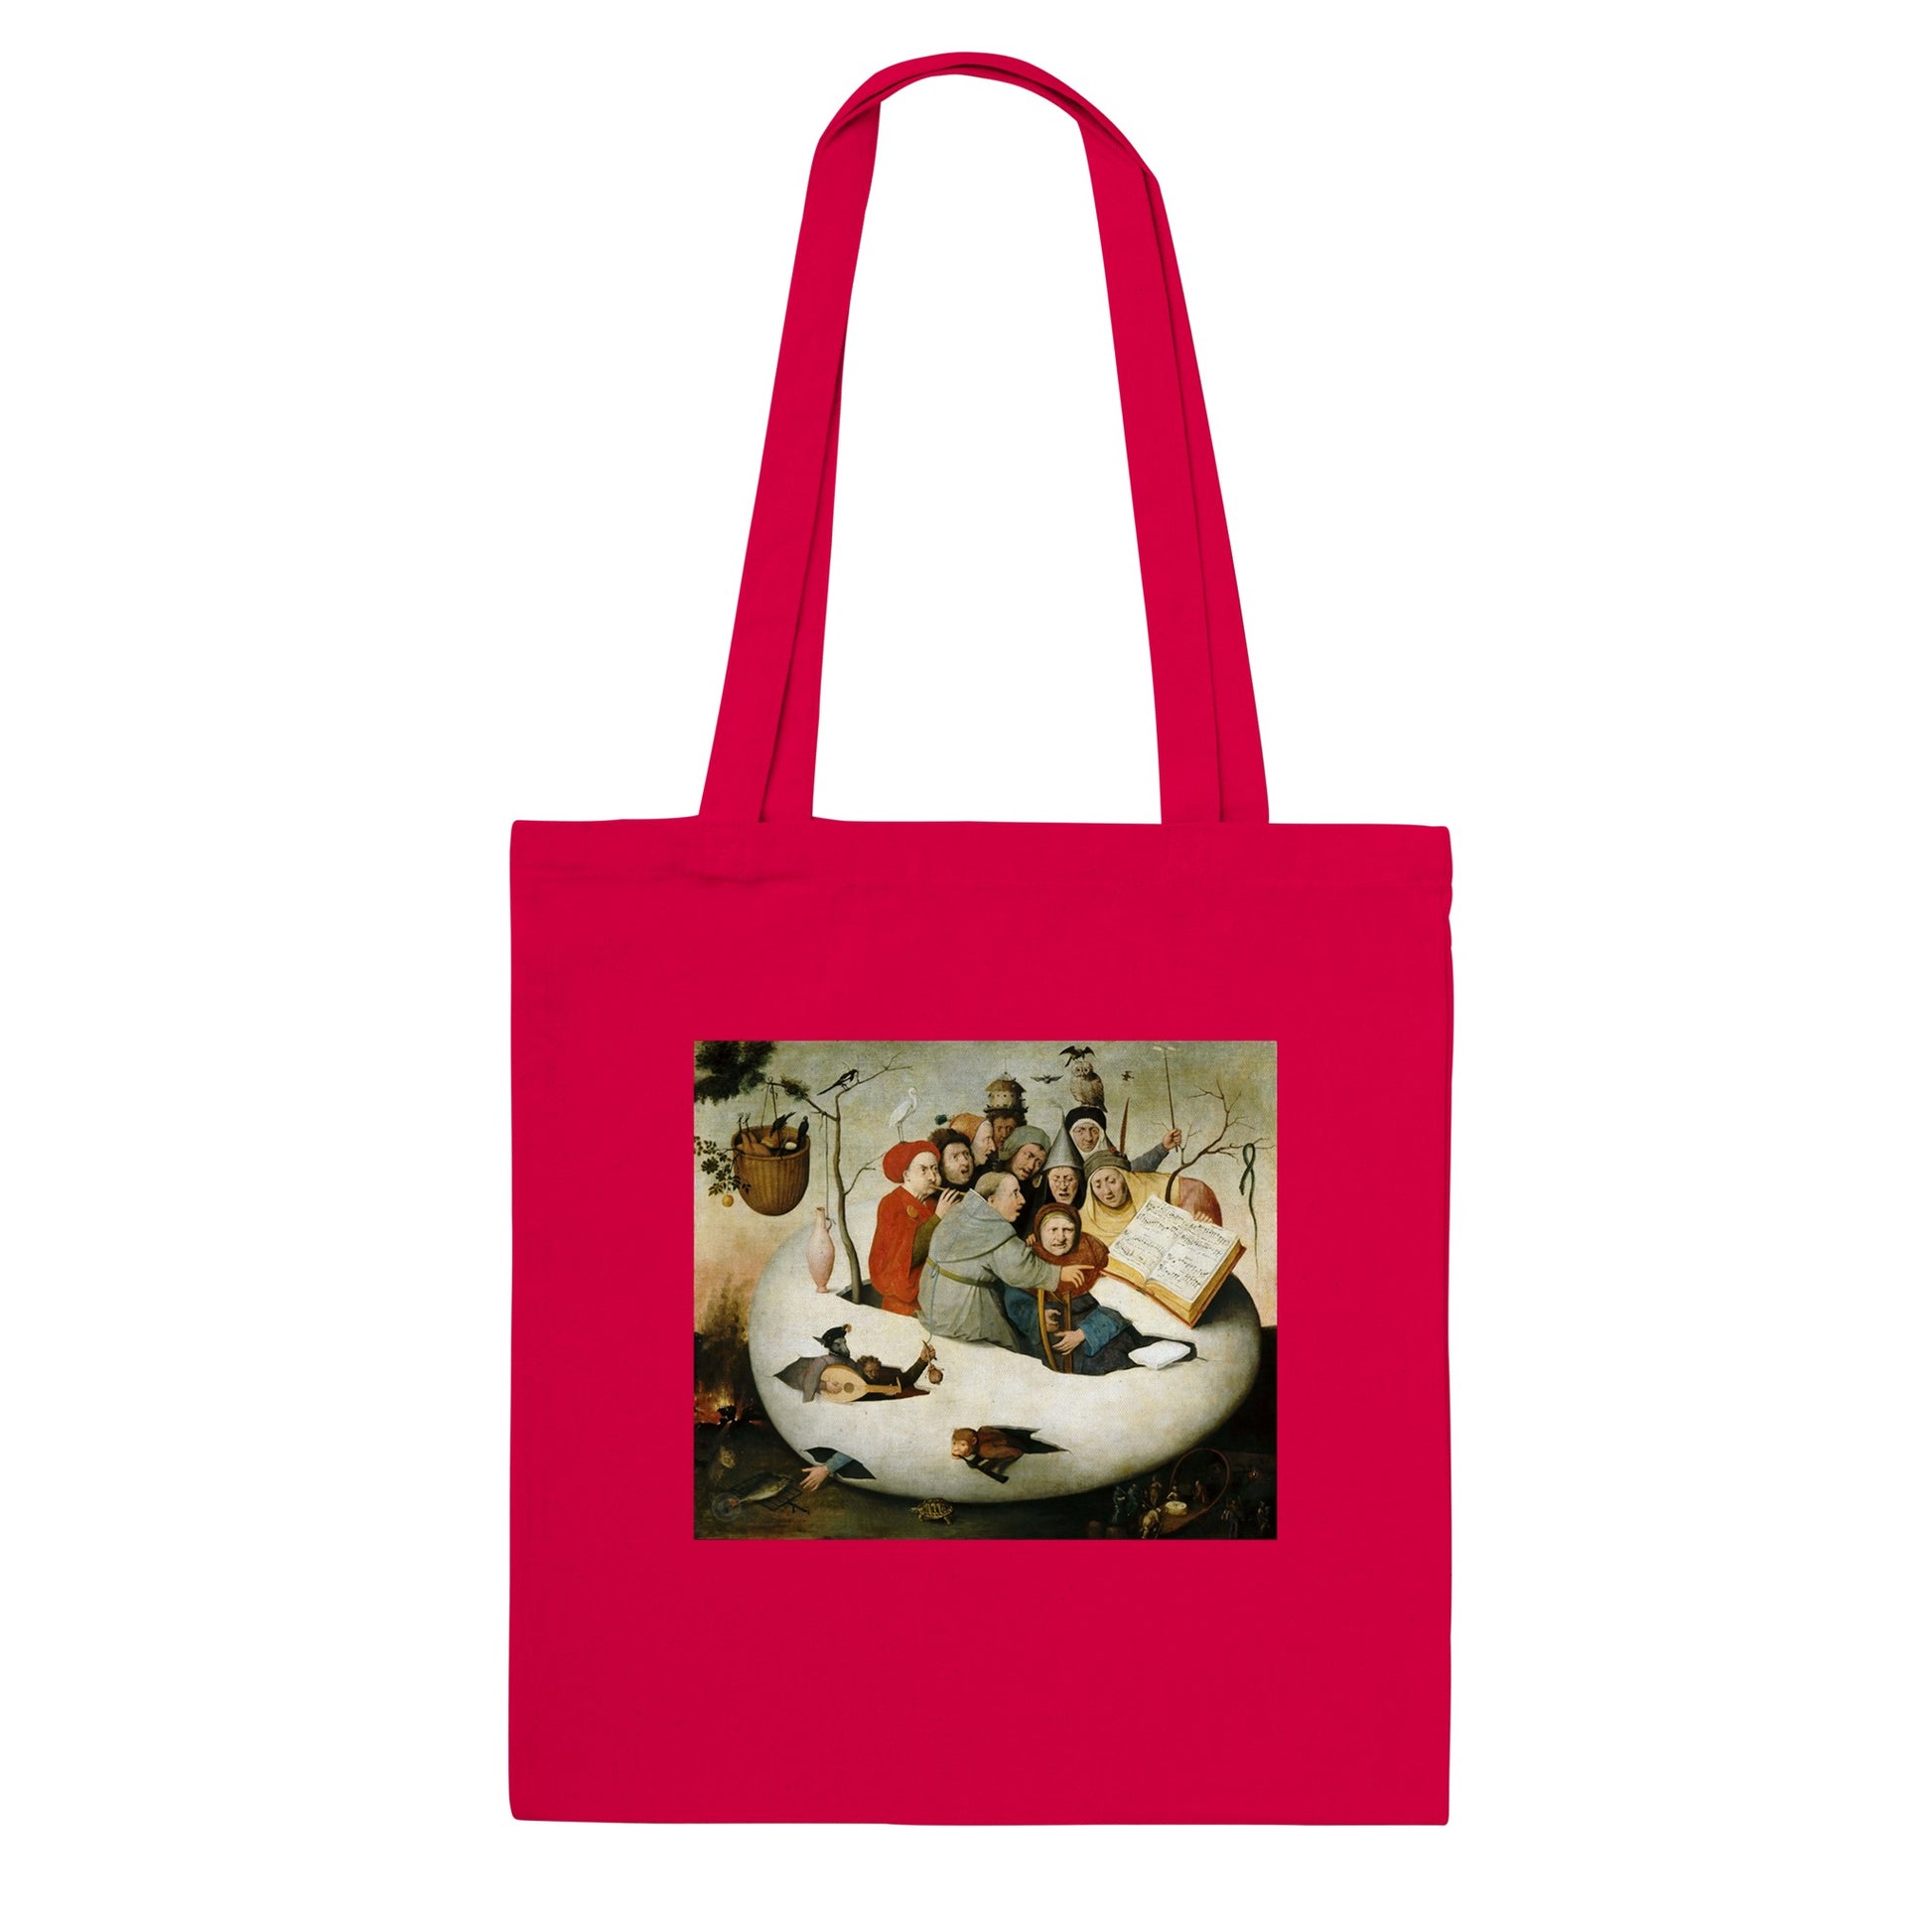 HIERONIMUS BOSCH - CONCERT IN THE EGG - CLASSIC TOTE BAG